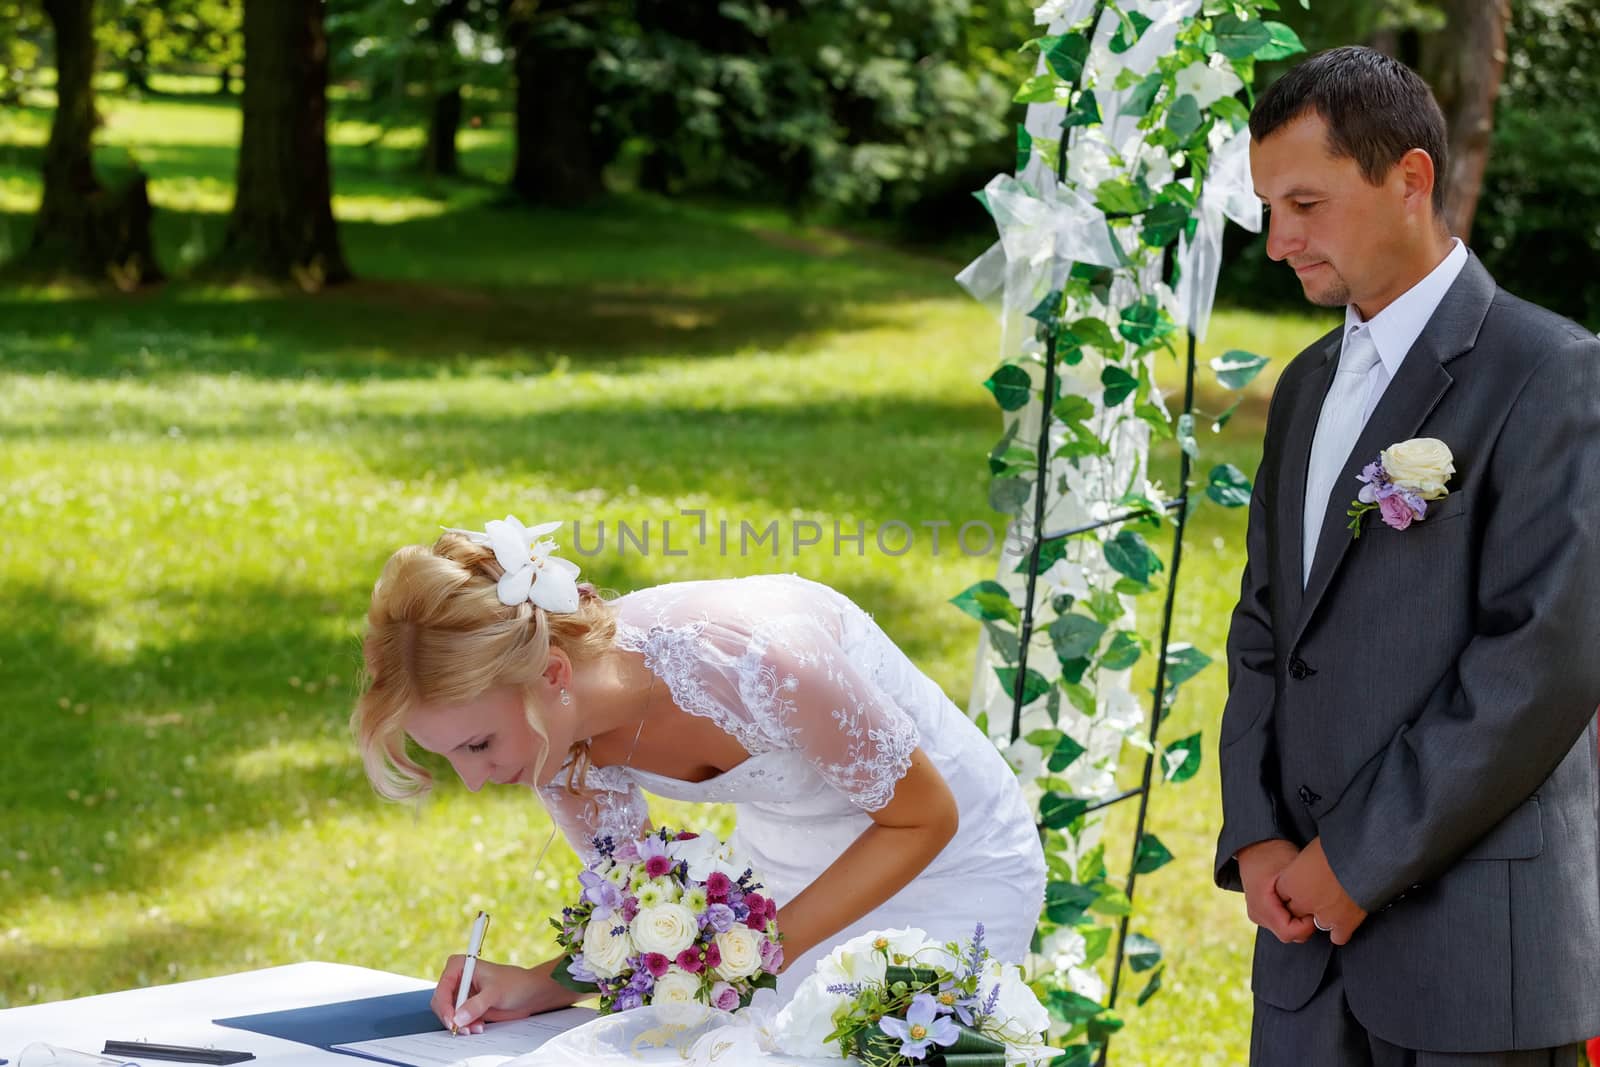 beautiful blonde smiling bride signed wedding contract against green grass outdoor, groom looking on her